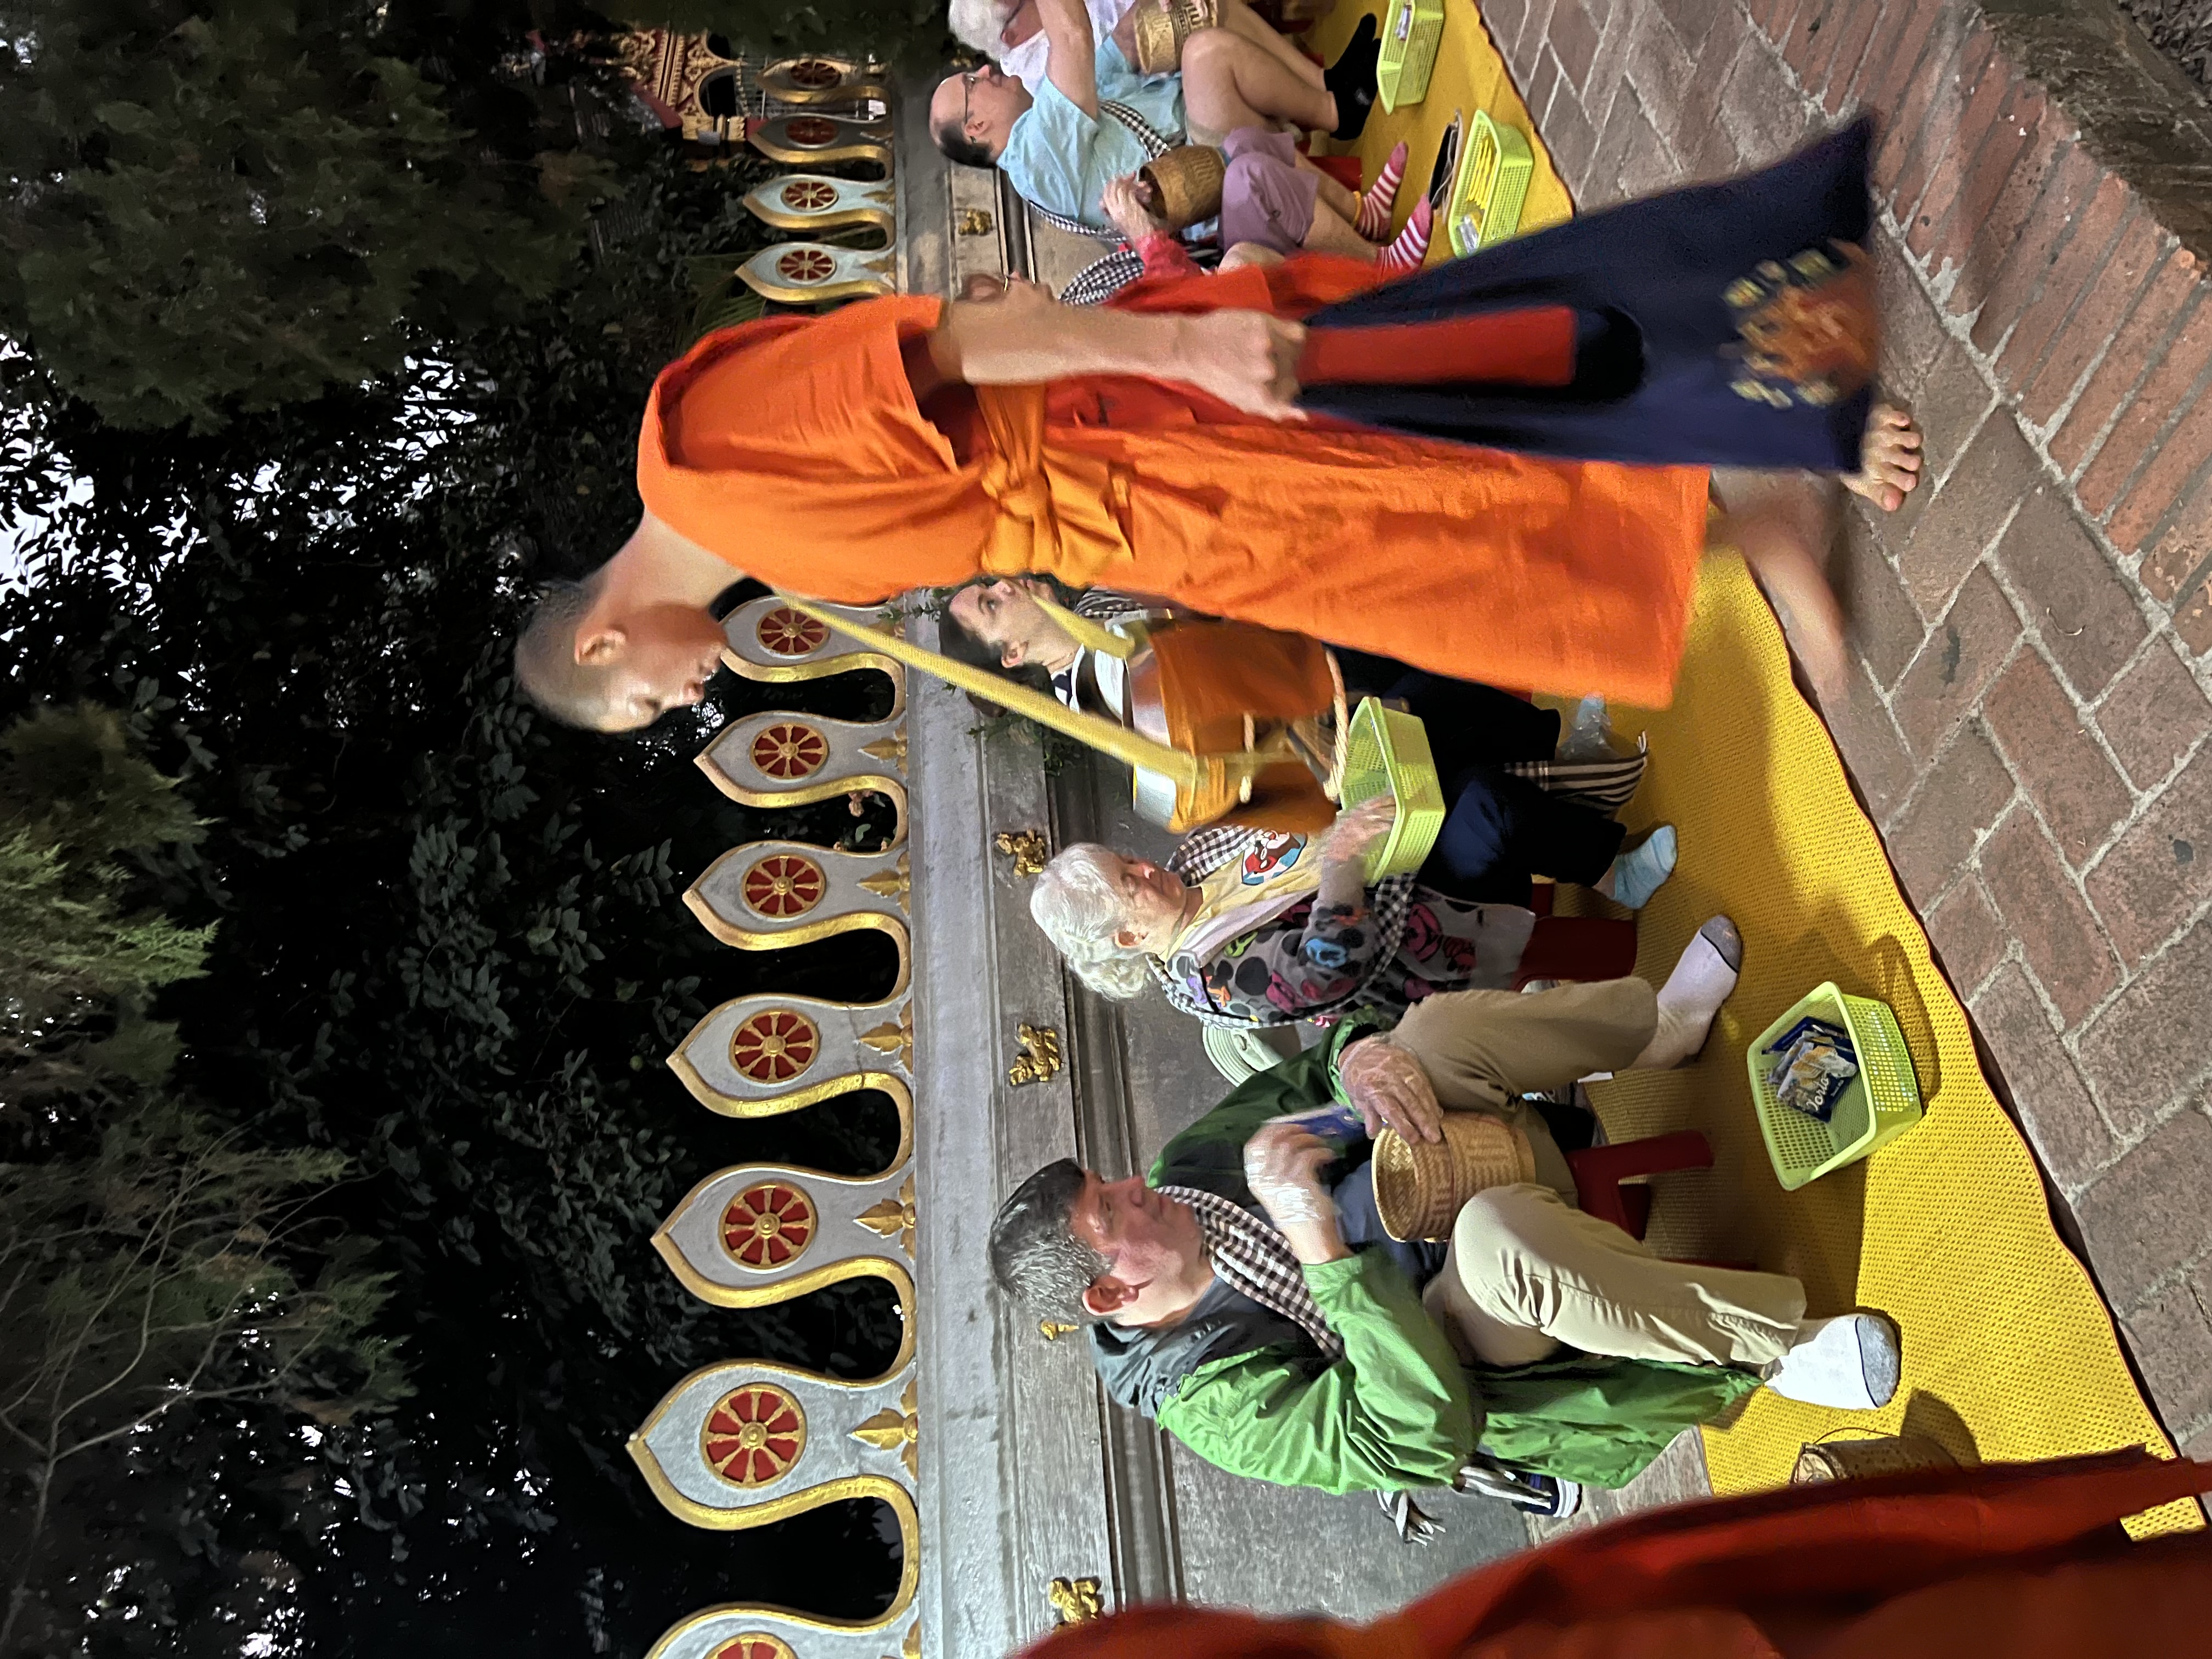 a man in orange robe standing on a yellow mat with people sitting on the ground